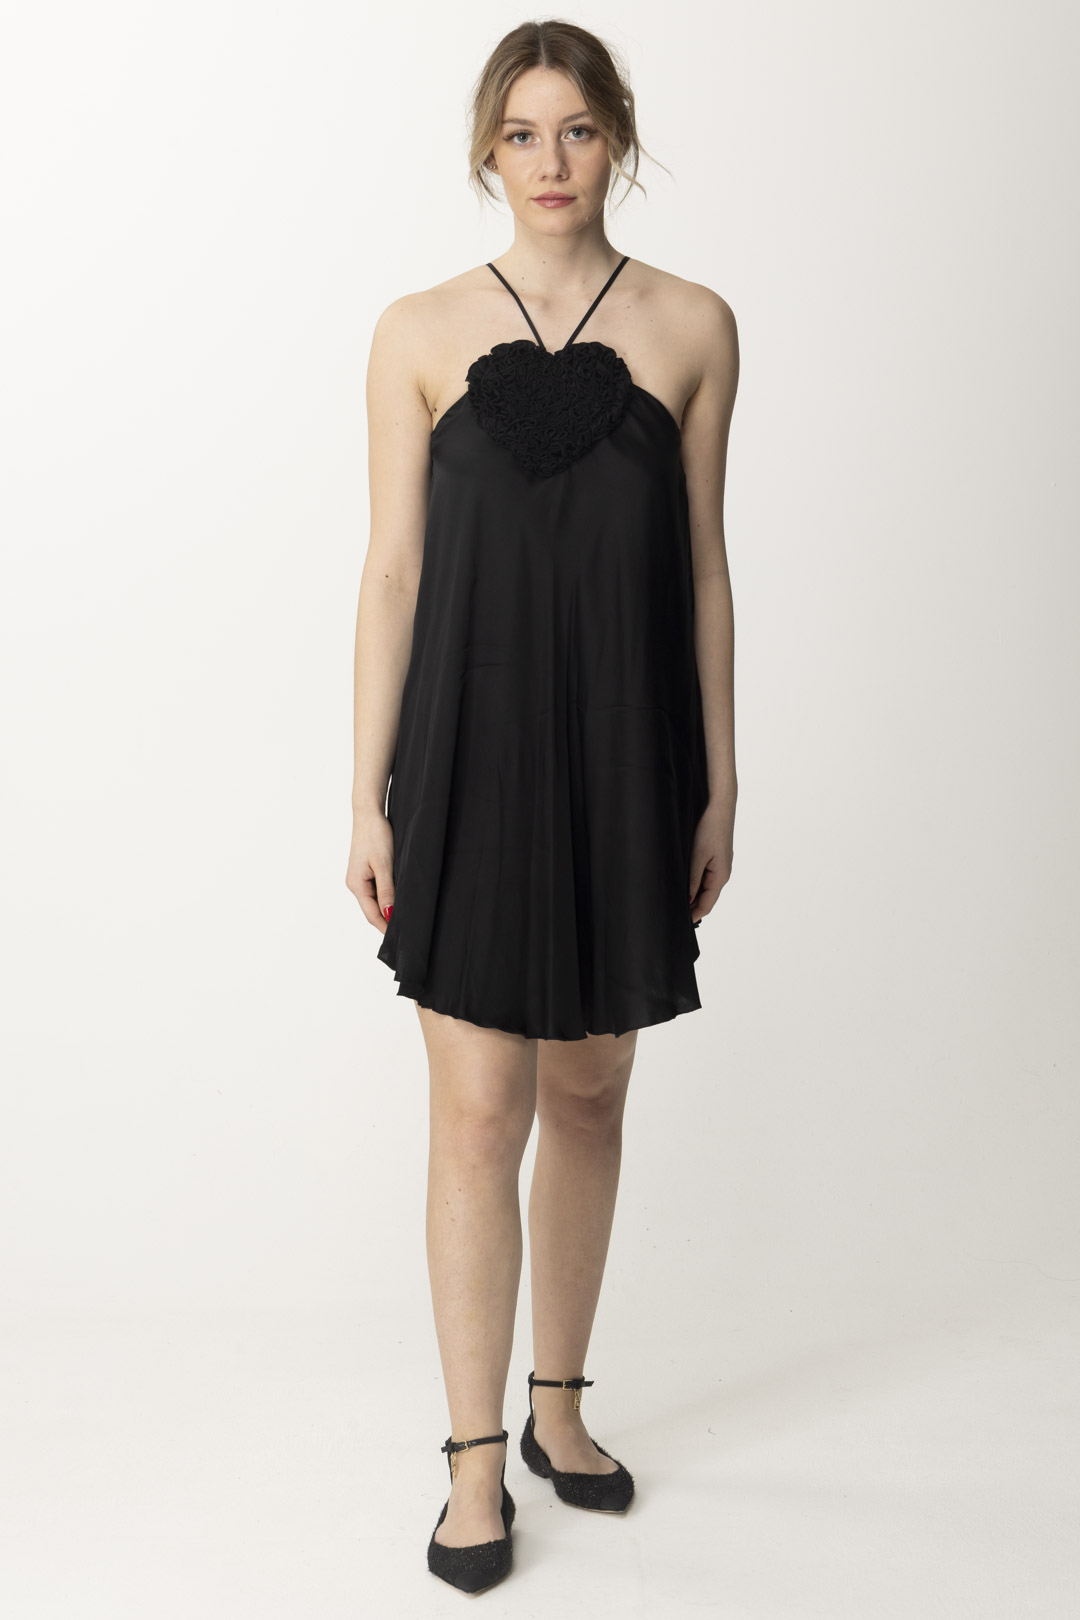 Preview: Aniye By Mary heart-shaped mini dress Black